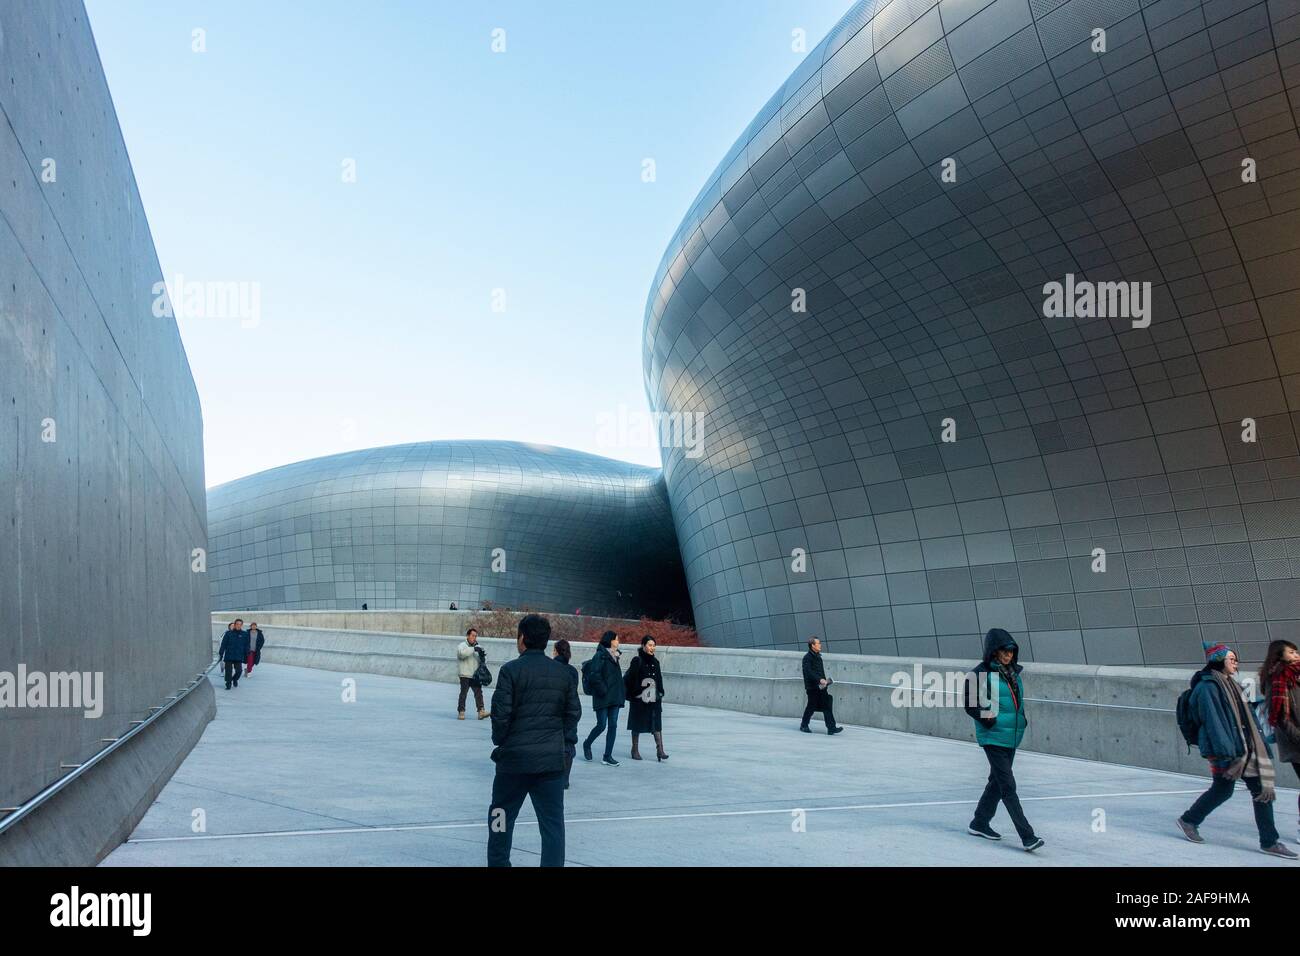 Seoul, South Korea - December 6th, 2019: Dongdaemun Design Plaza,serve as a key venue for design-related shows and conferences, exhibitions, and other Stock Photo